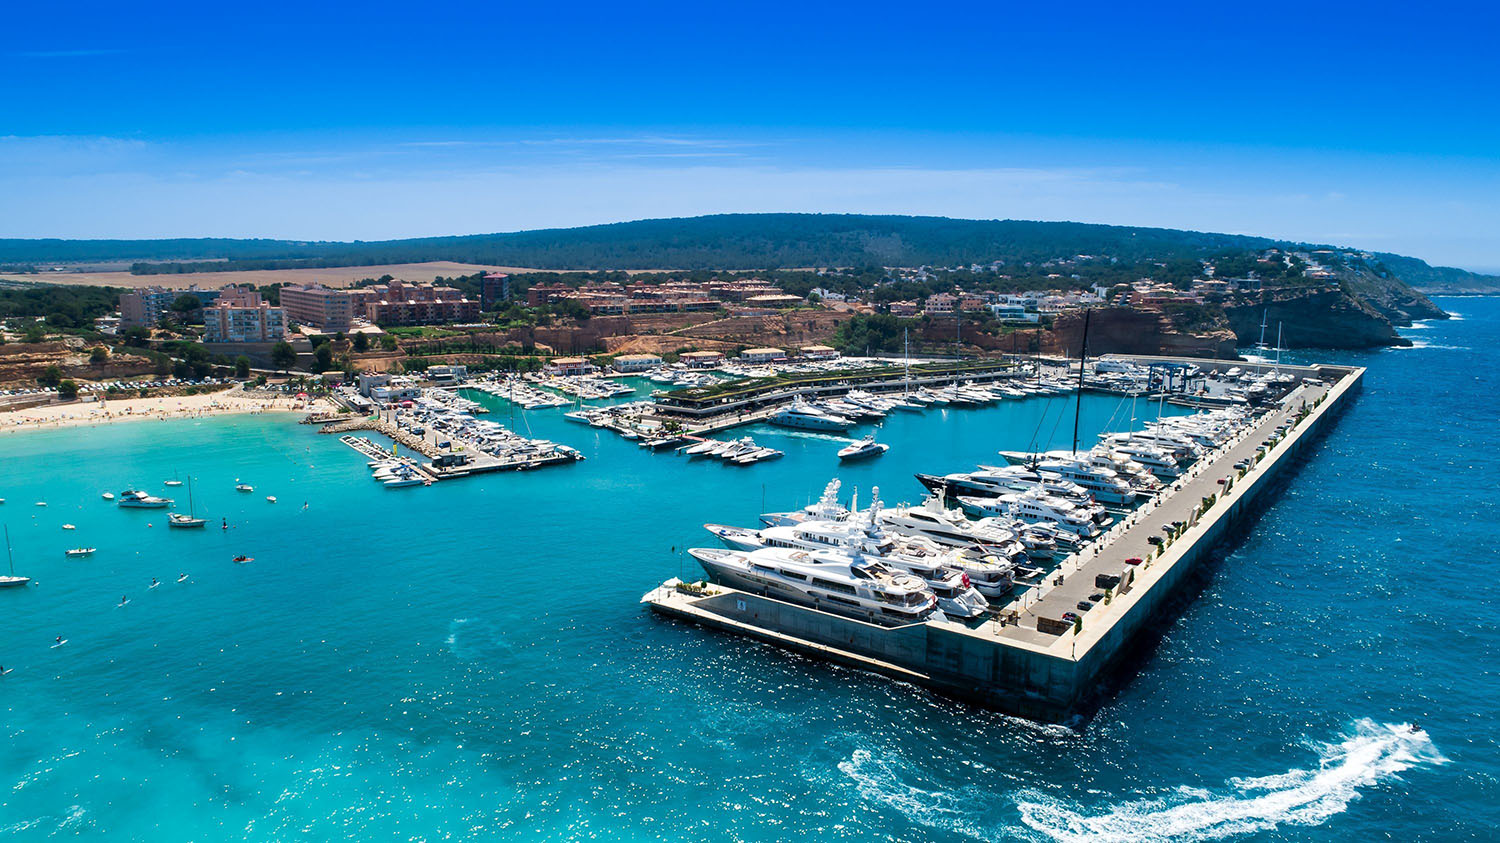 View of the noble marina Port Adriano on Mallorca - Port Adriano - Concert - Concerto 2024 Copyright: port-adriano.com